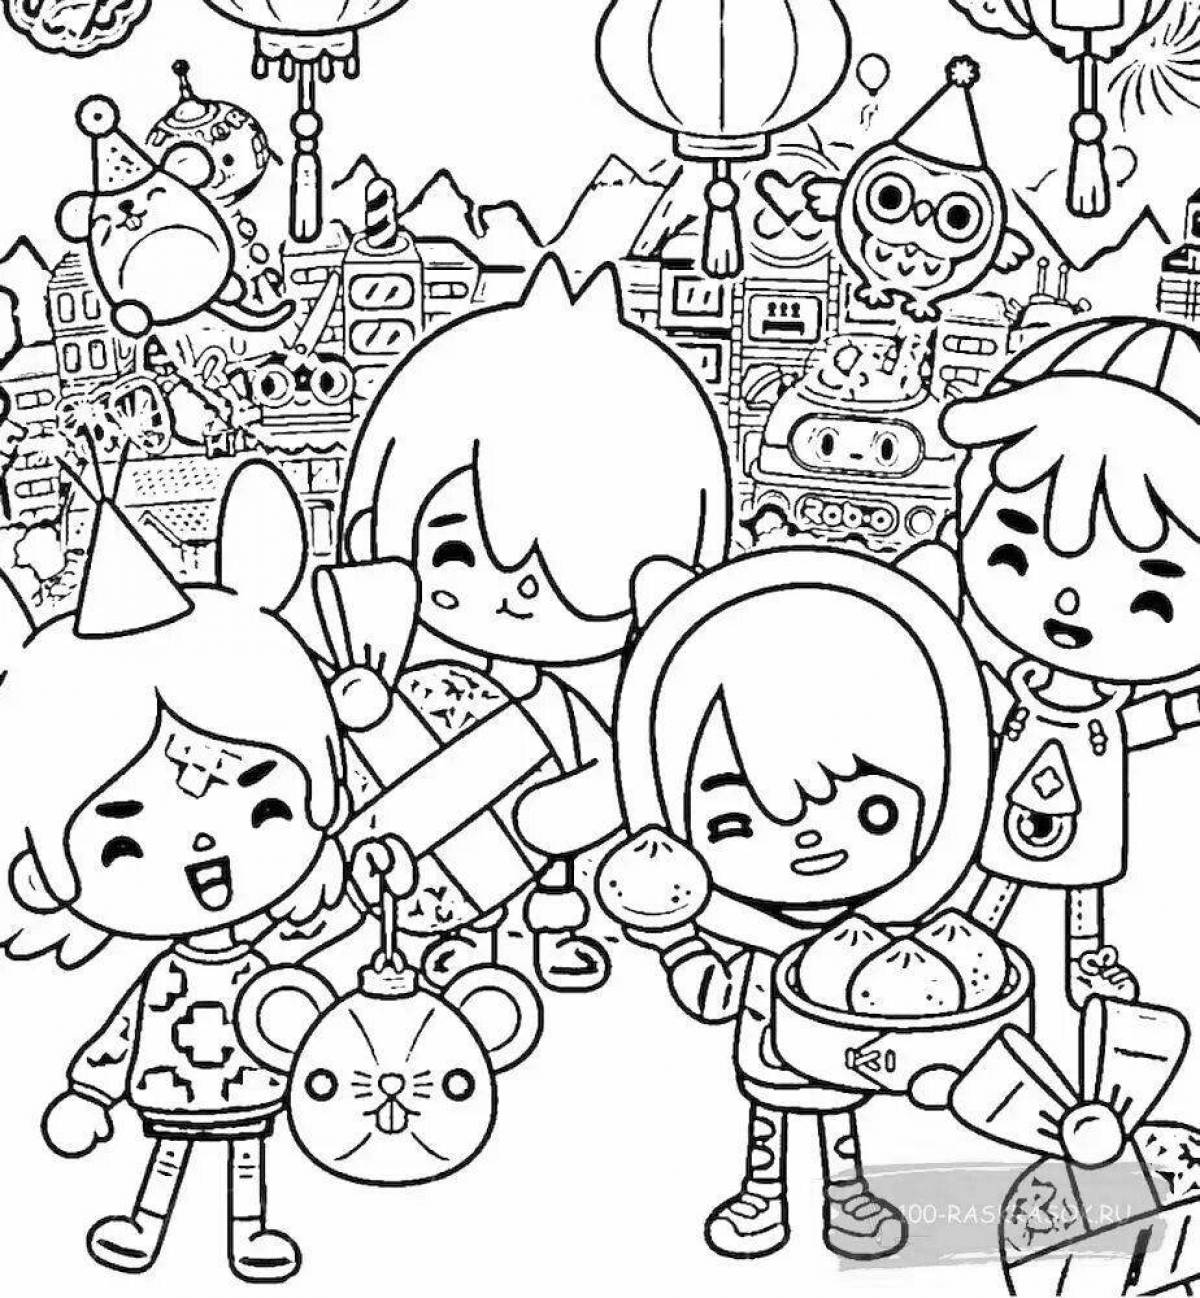 Great coloring page printout